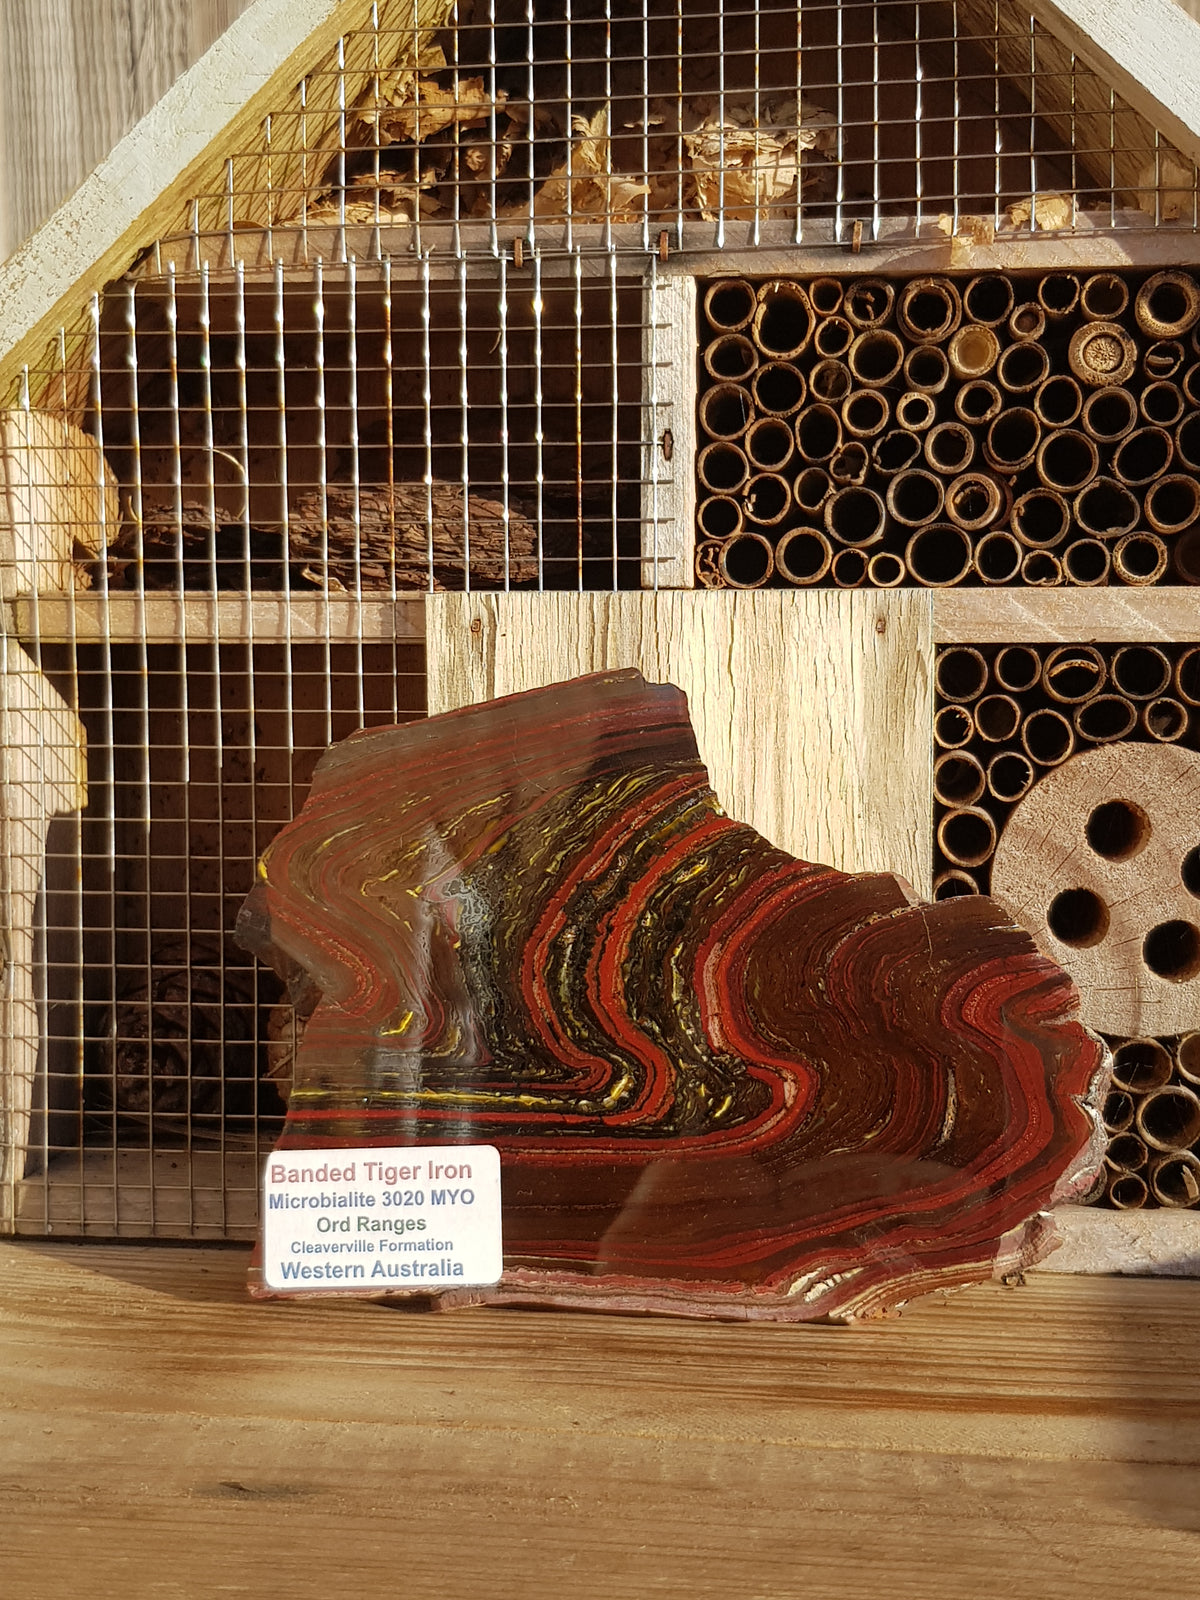 a slice of a banded iron formation is leant against a decorative birdhouse. The banded iron formation consists of thin laminations of red jasper and silvery hematite, interspersed with some tiger eye. the laminations are bendy. There is a label on the sample, it gives geographic information about the sample and this is typed up and present on the write up on the web site